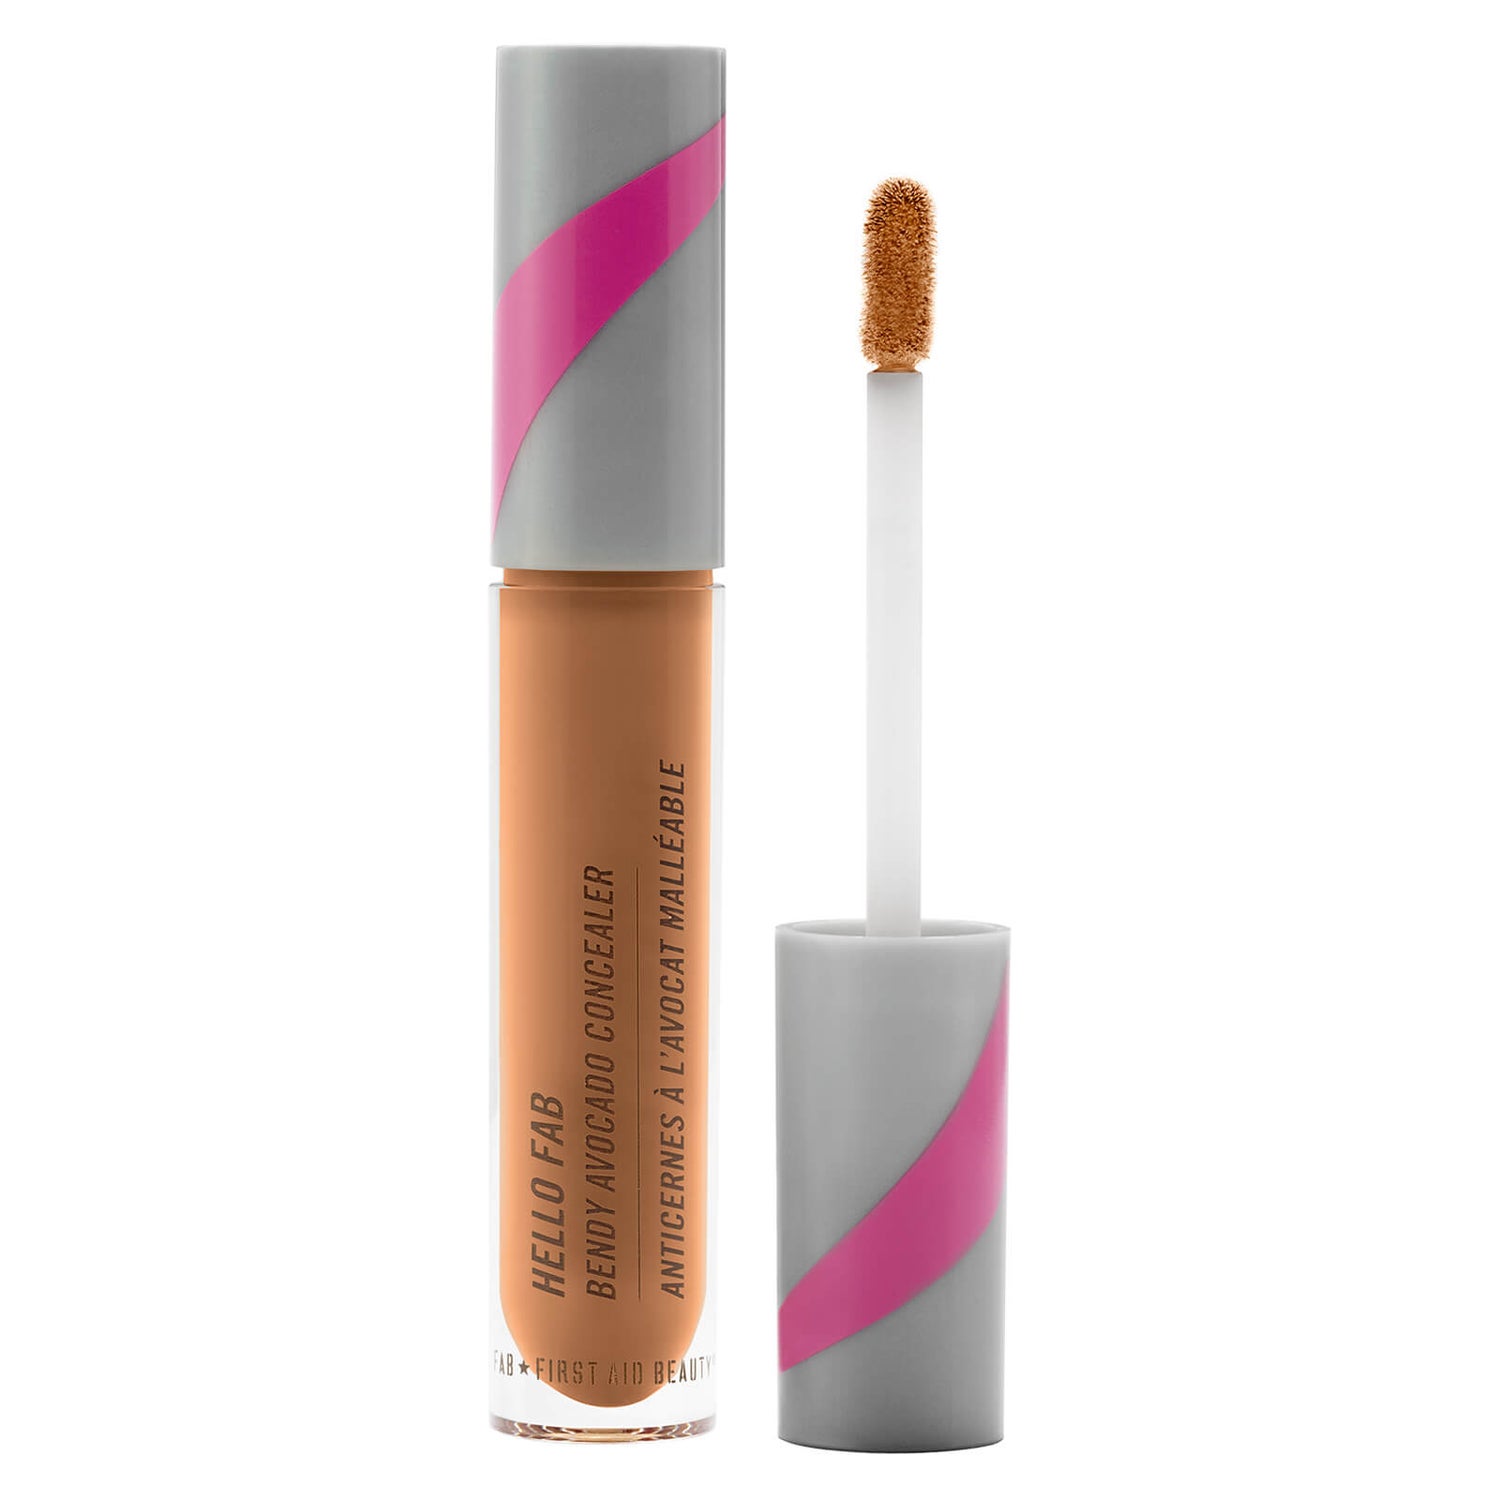 First Aid Beauty Hello FAB Bendy Avocado Concealer 4.8g (Various Shades) - Tan